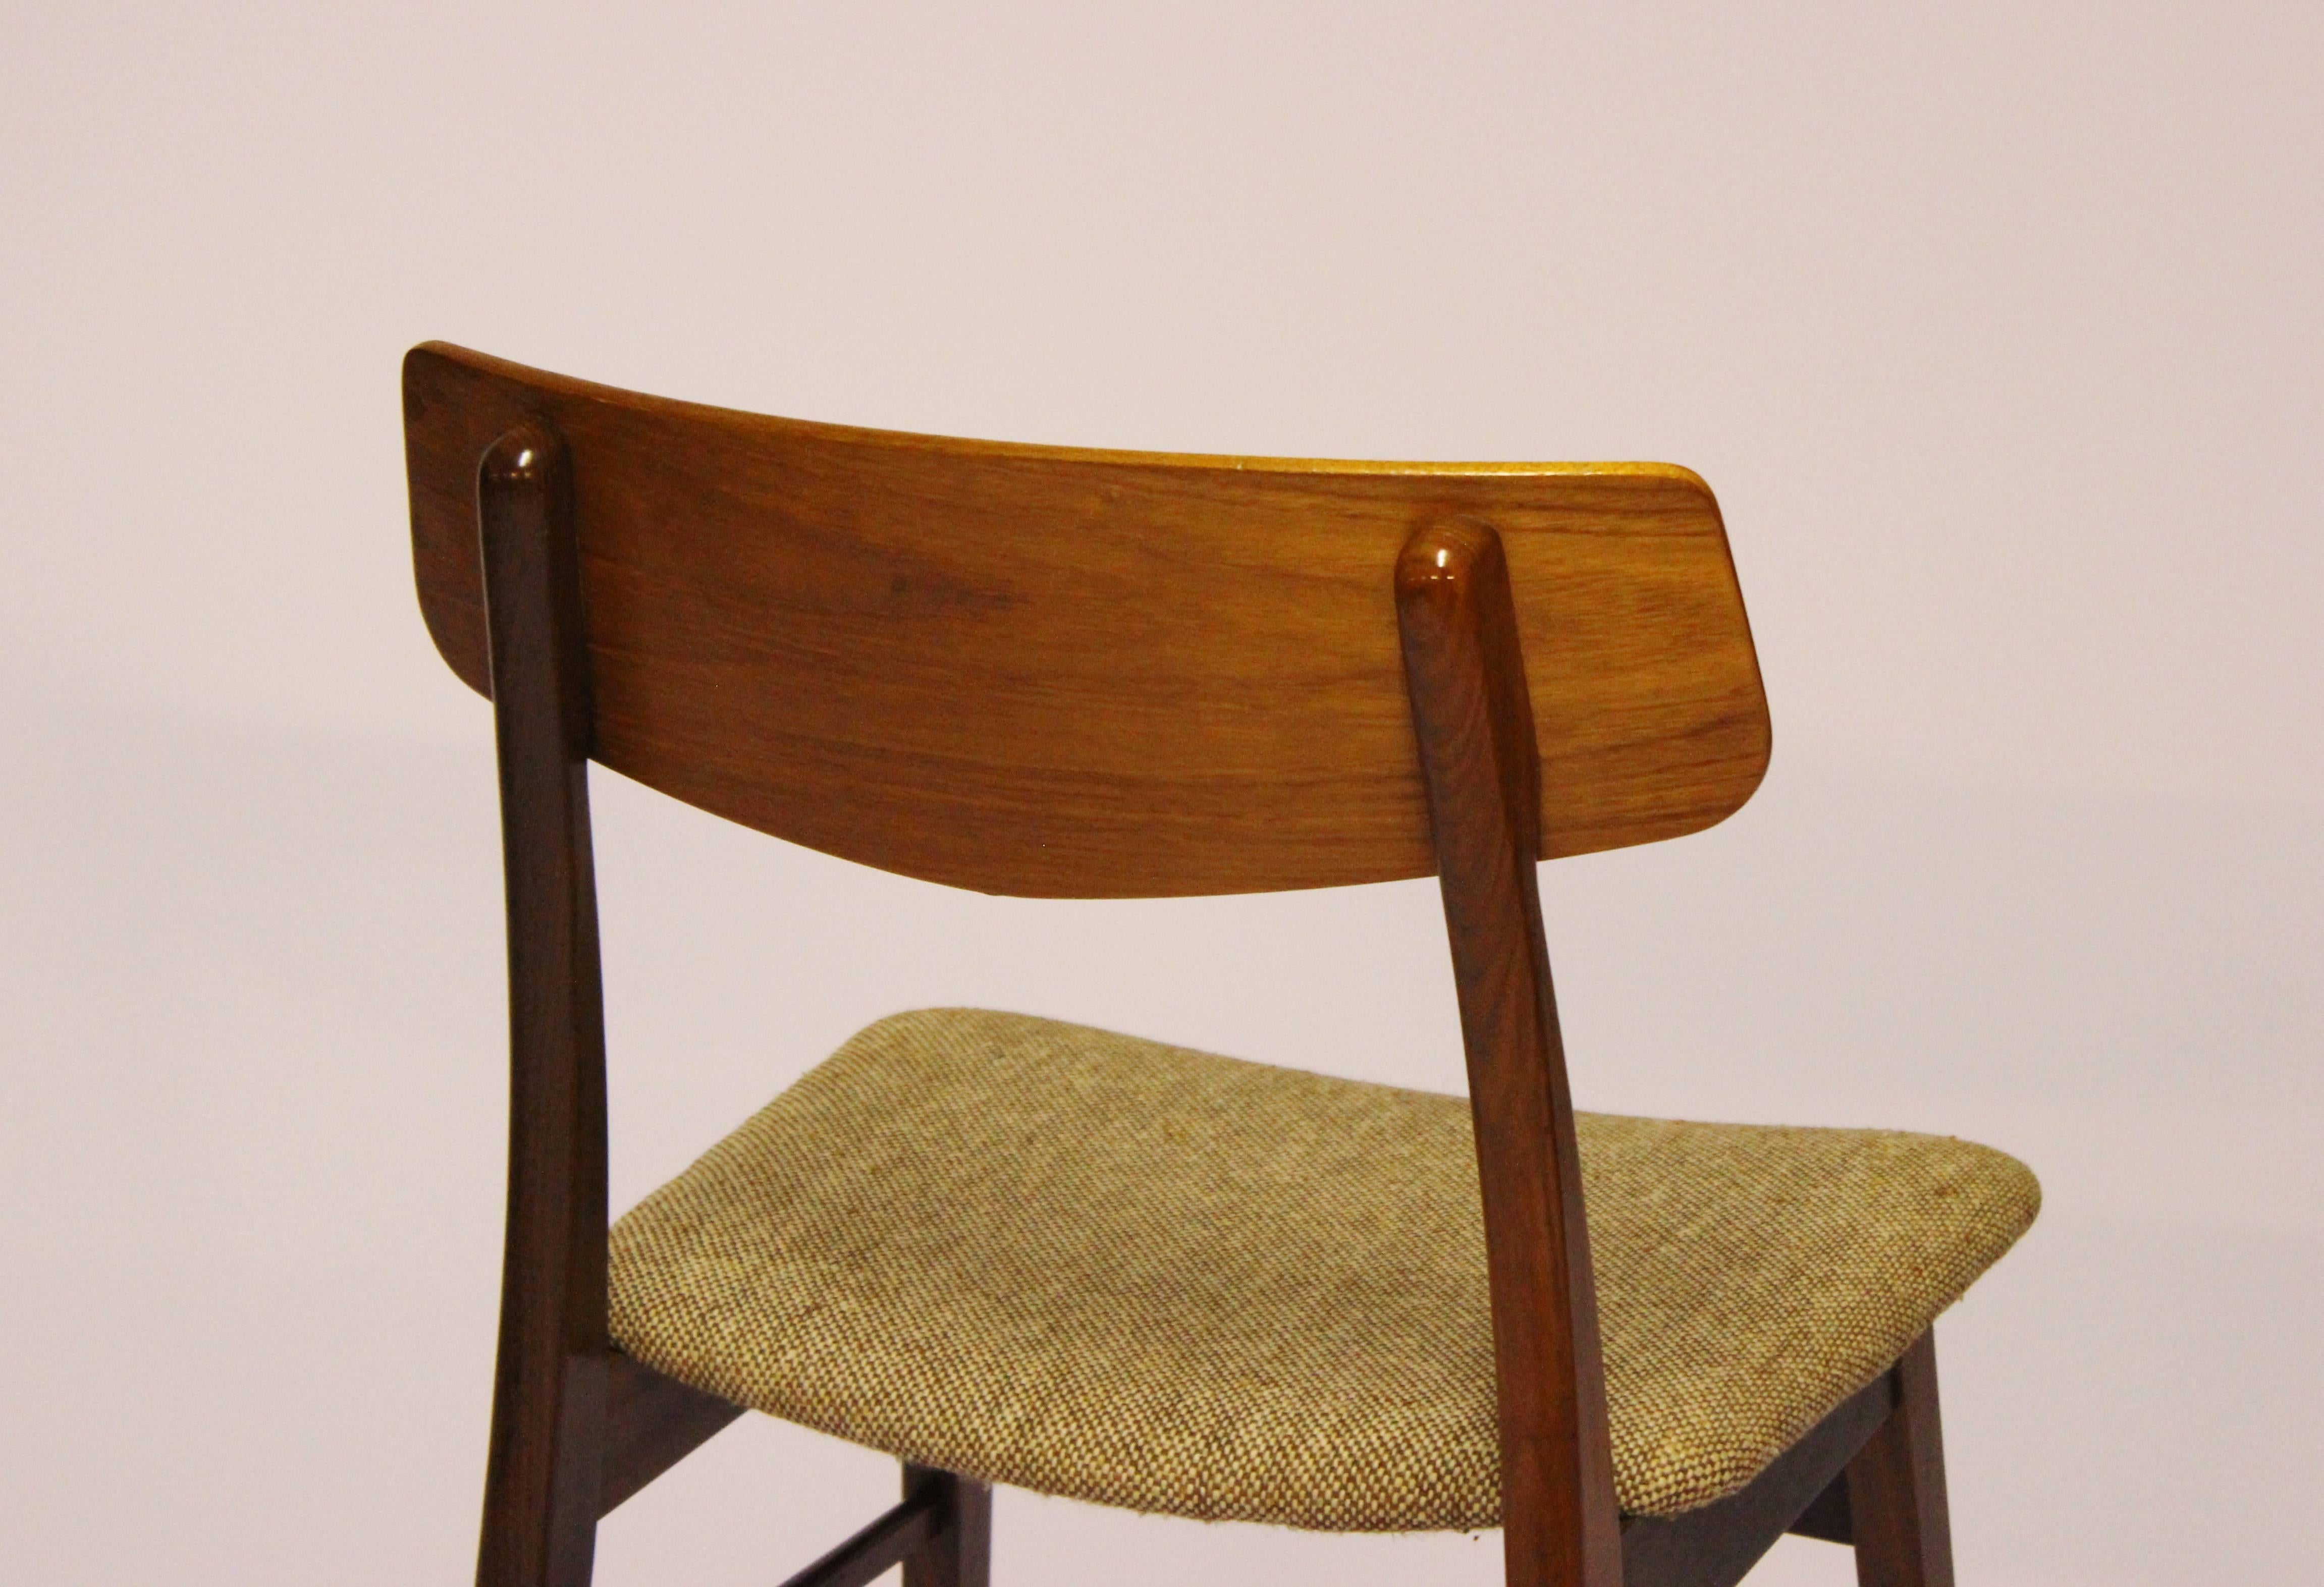 Mid-20th Century Dining Chair in Teak and Grey Wool Fabric of Danish Design, 1960s For Sale